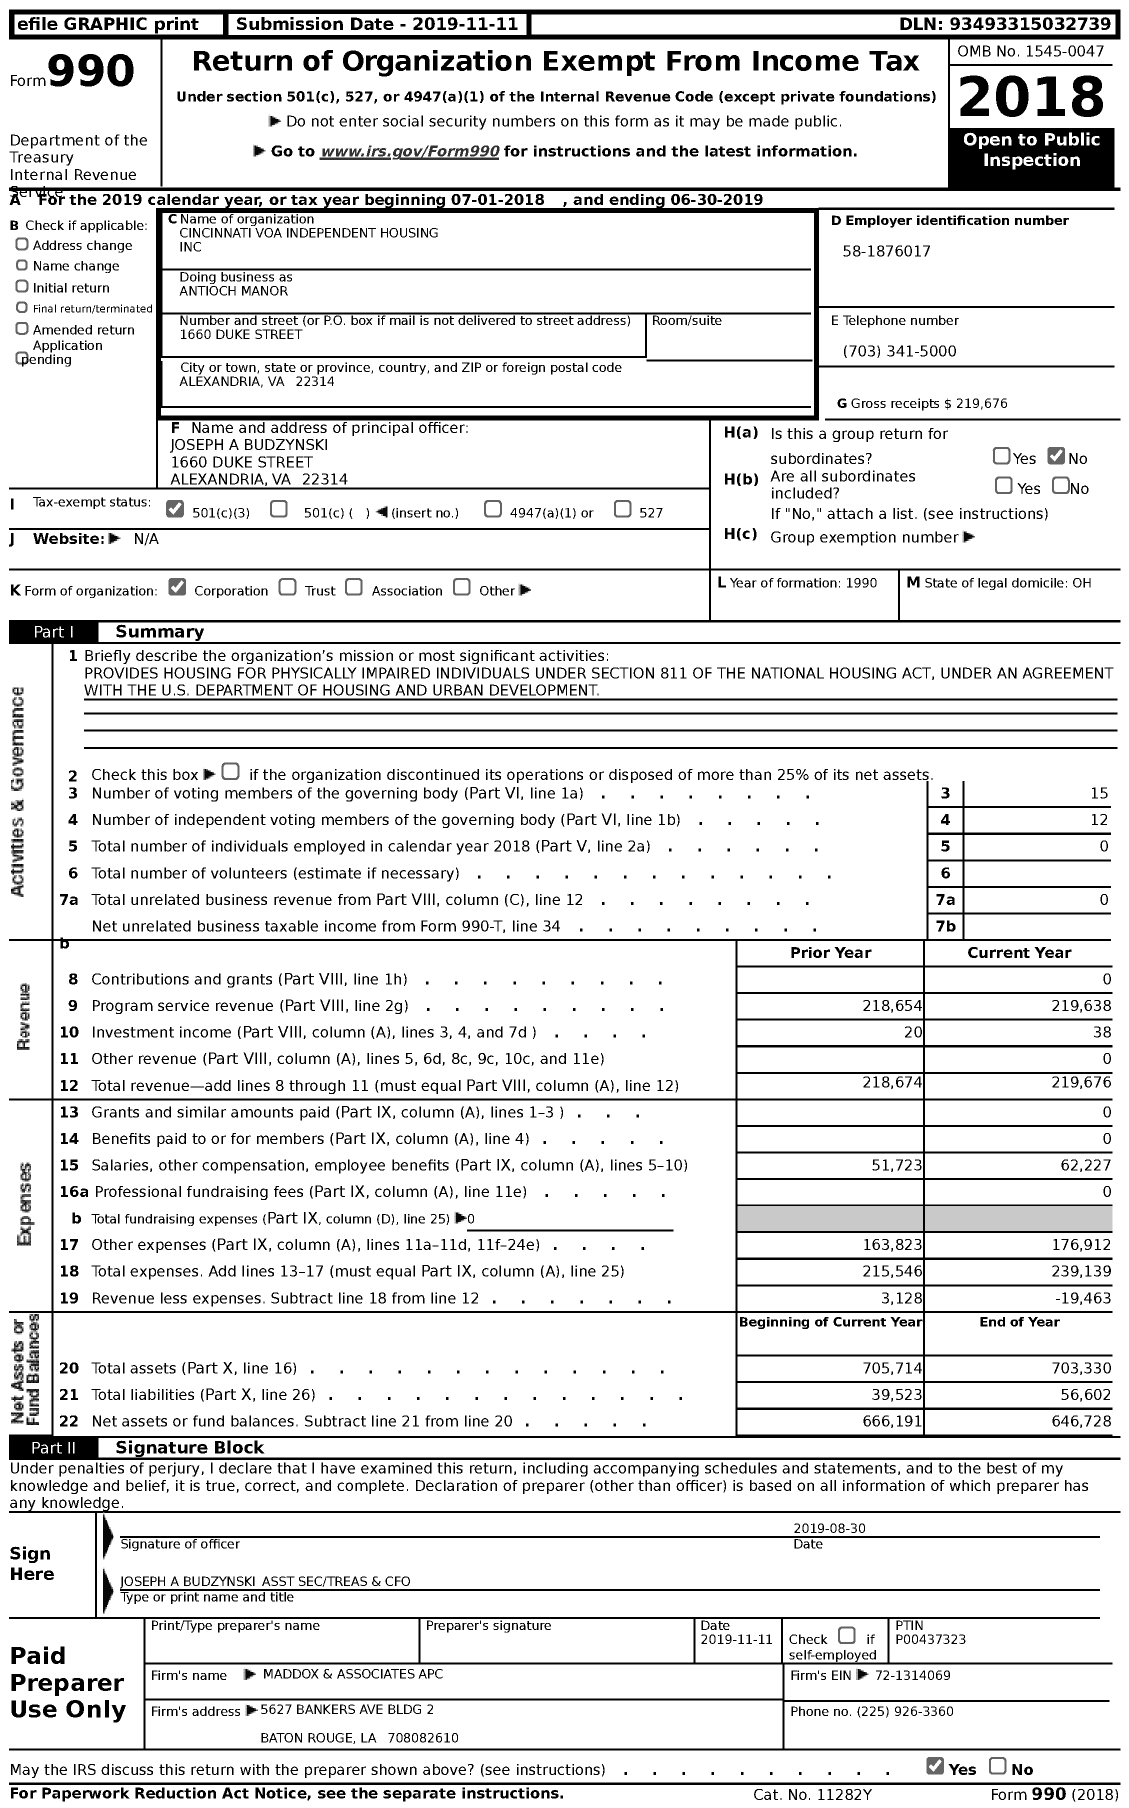 Image of first page of 2018 Form 990 for Volunteers of America - Cincinnati VOA Independent Housing